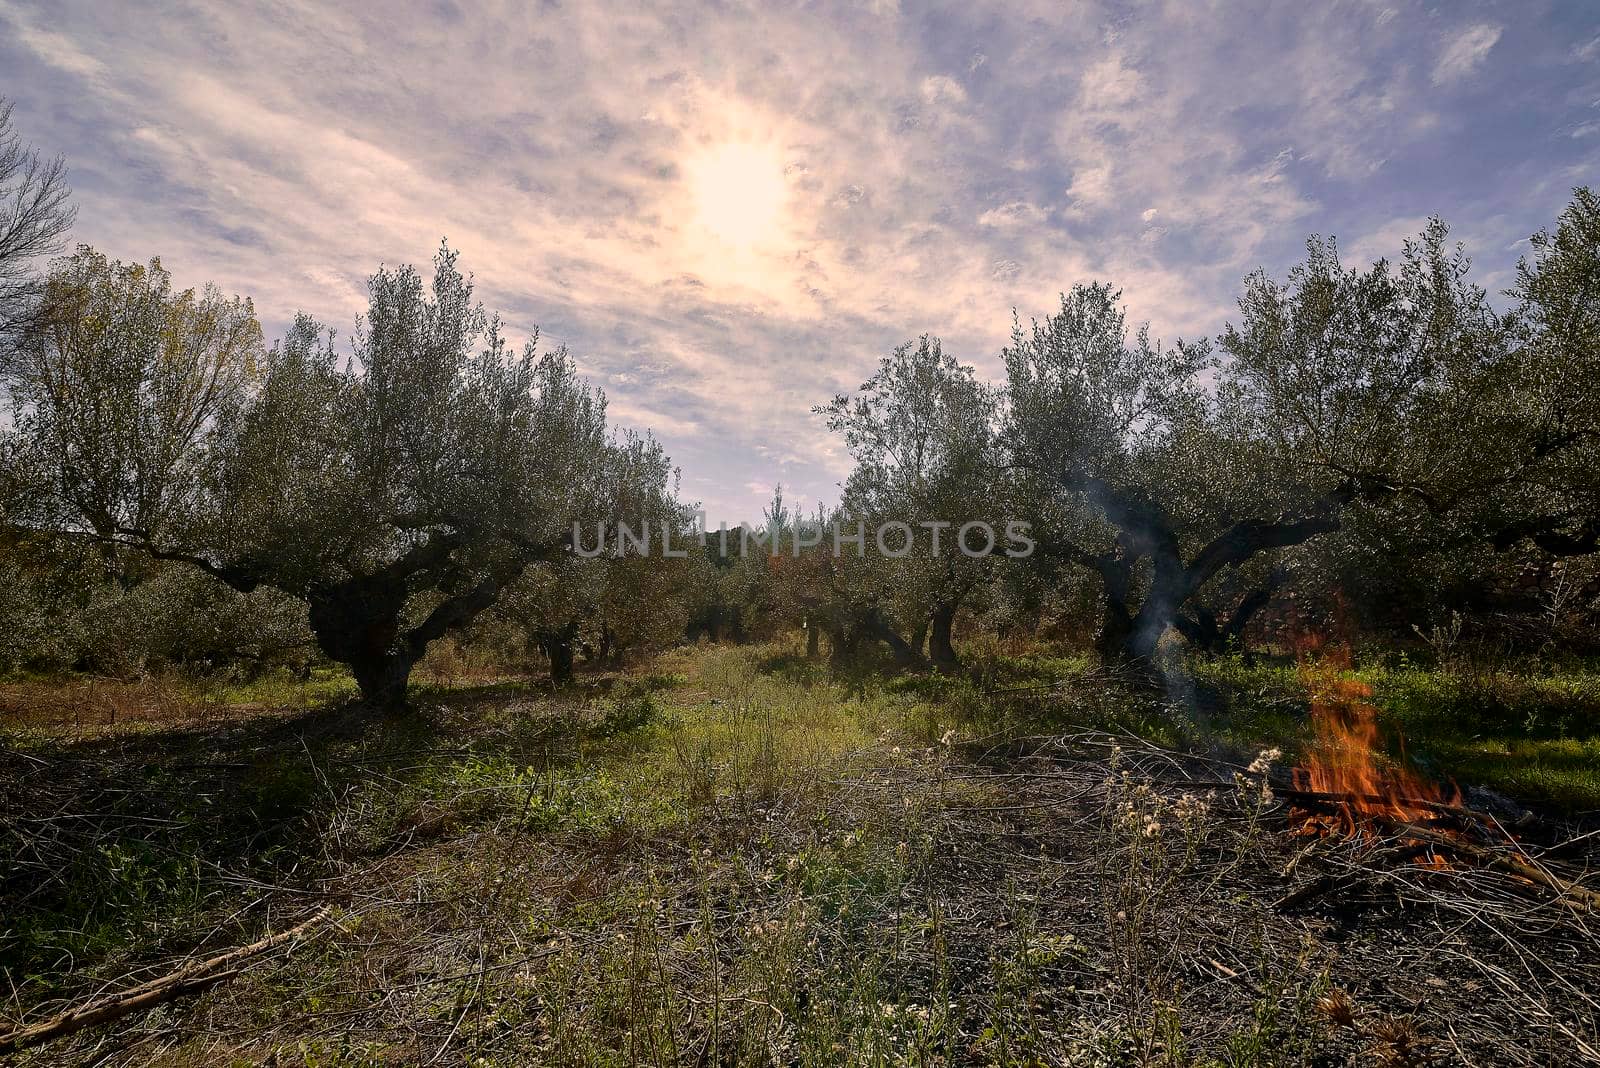 Field of centenary olive trees ready for harvesting by raul_ruiz